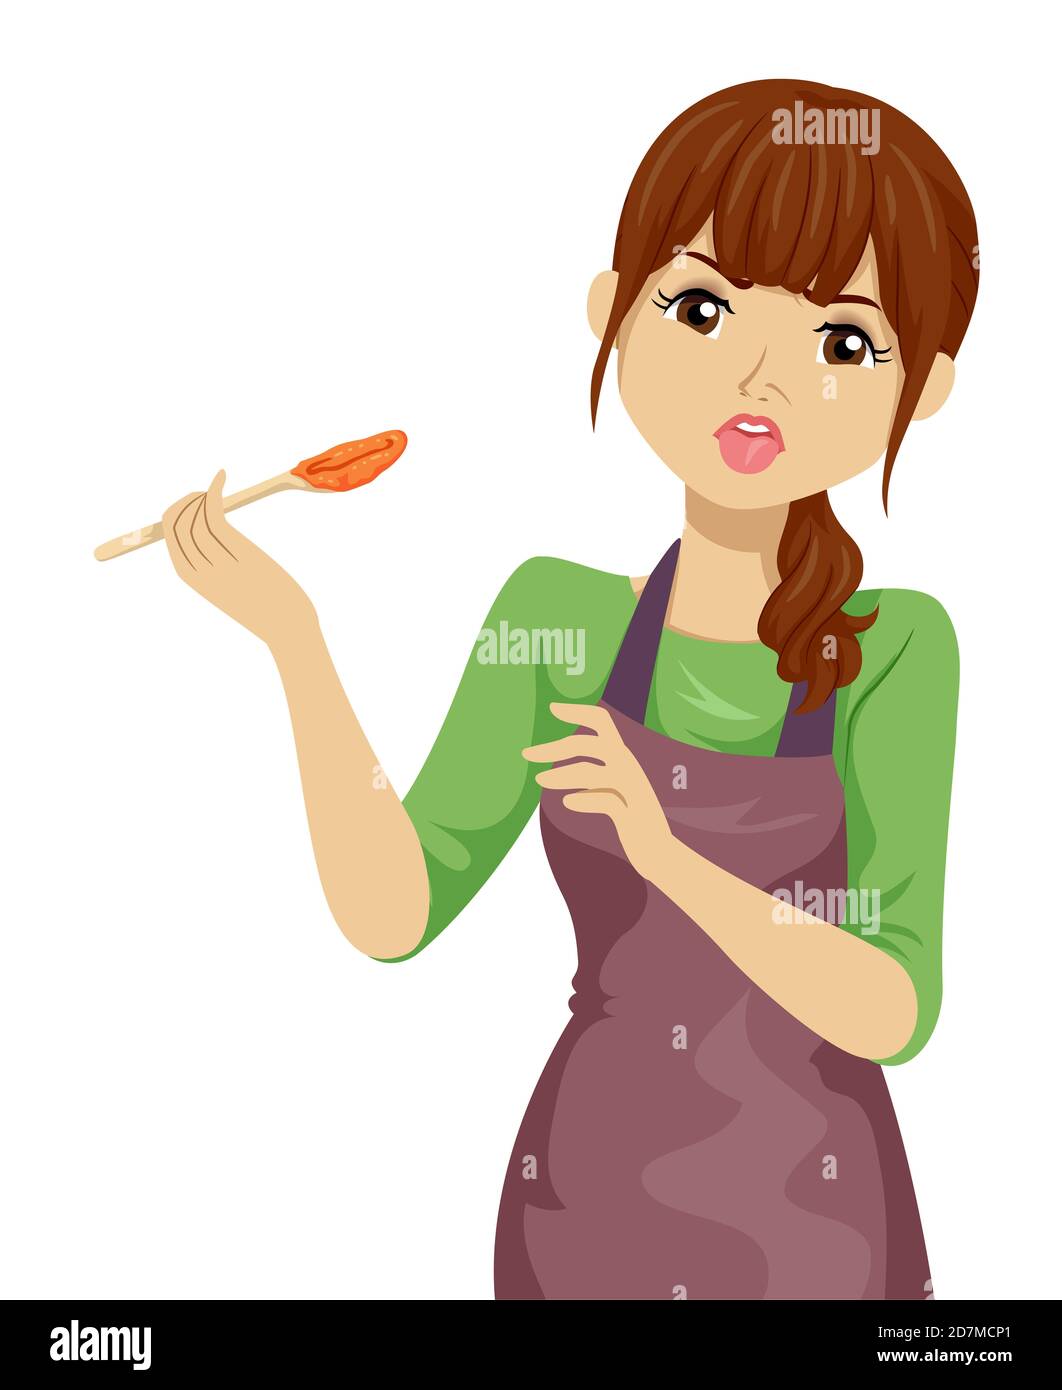 Illustration of a Teenage Girl Wearing Apron, Cooking and Tasting Something She Cooked Stock Photo